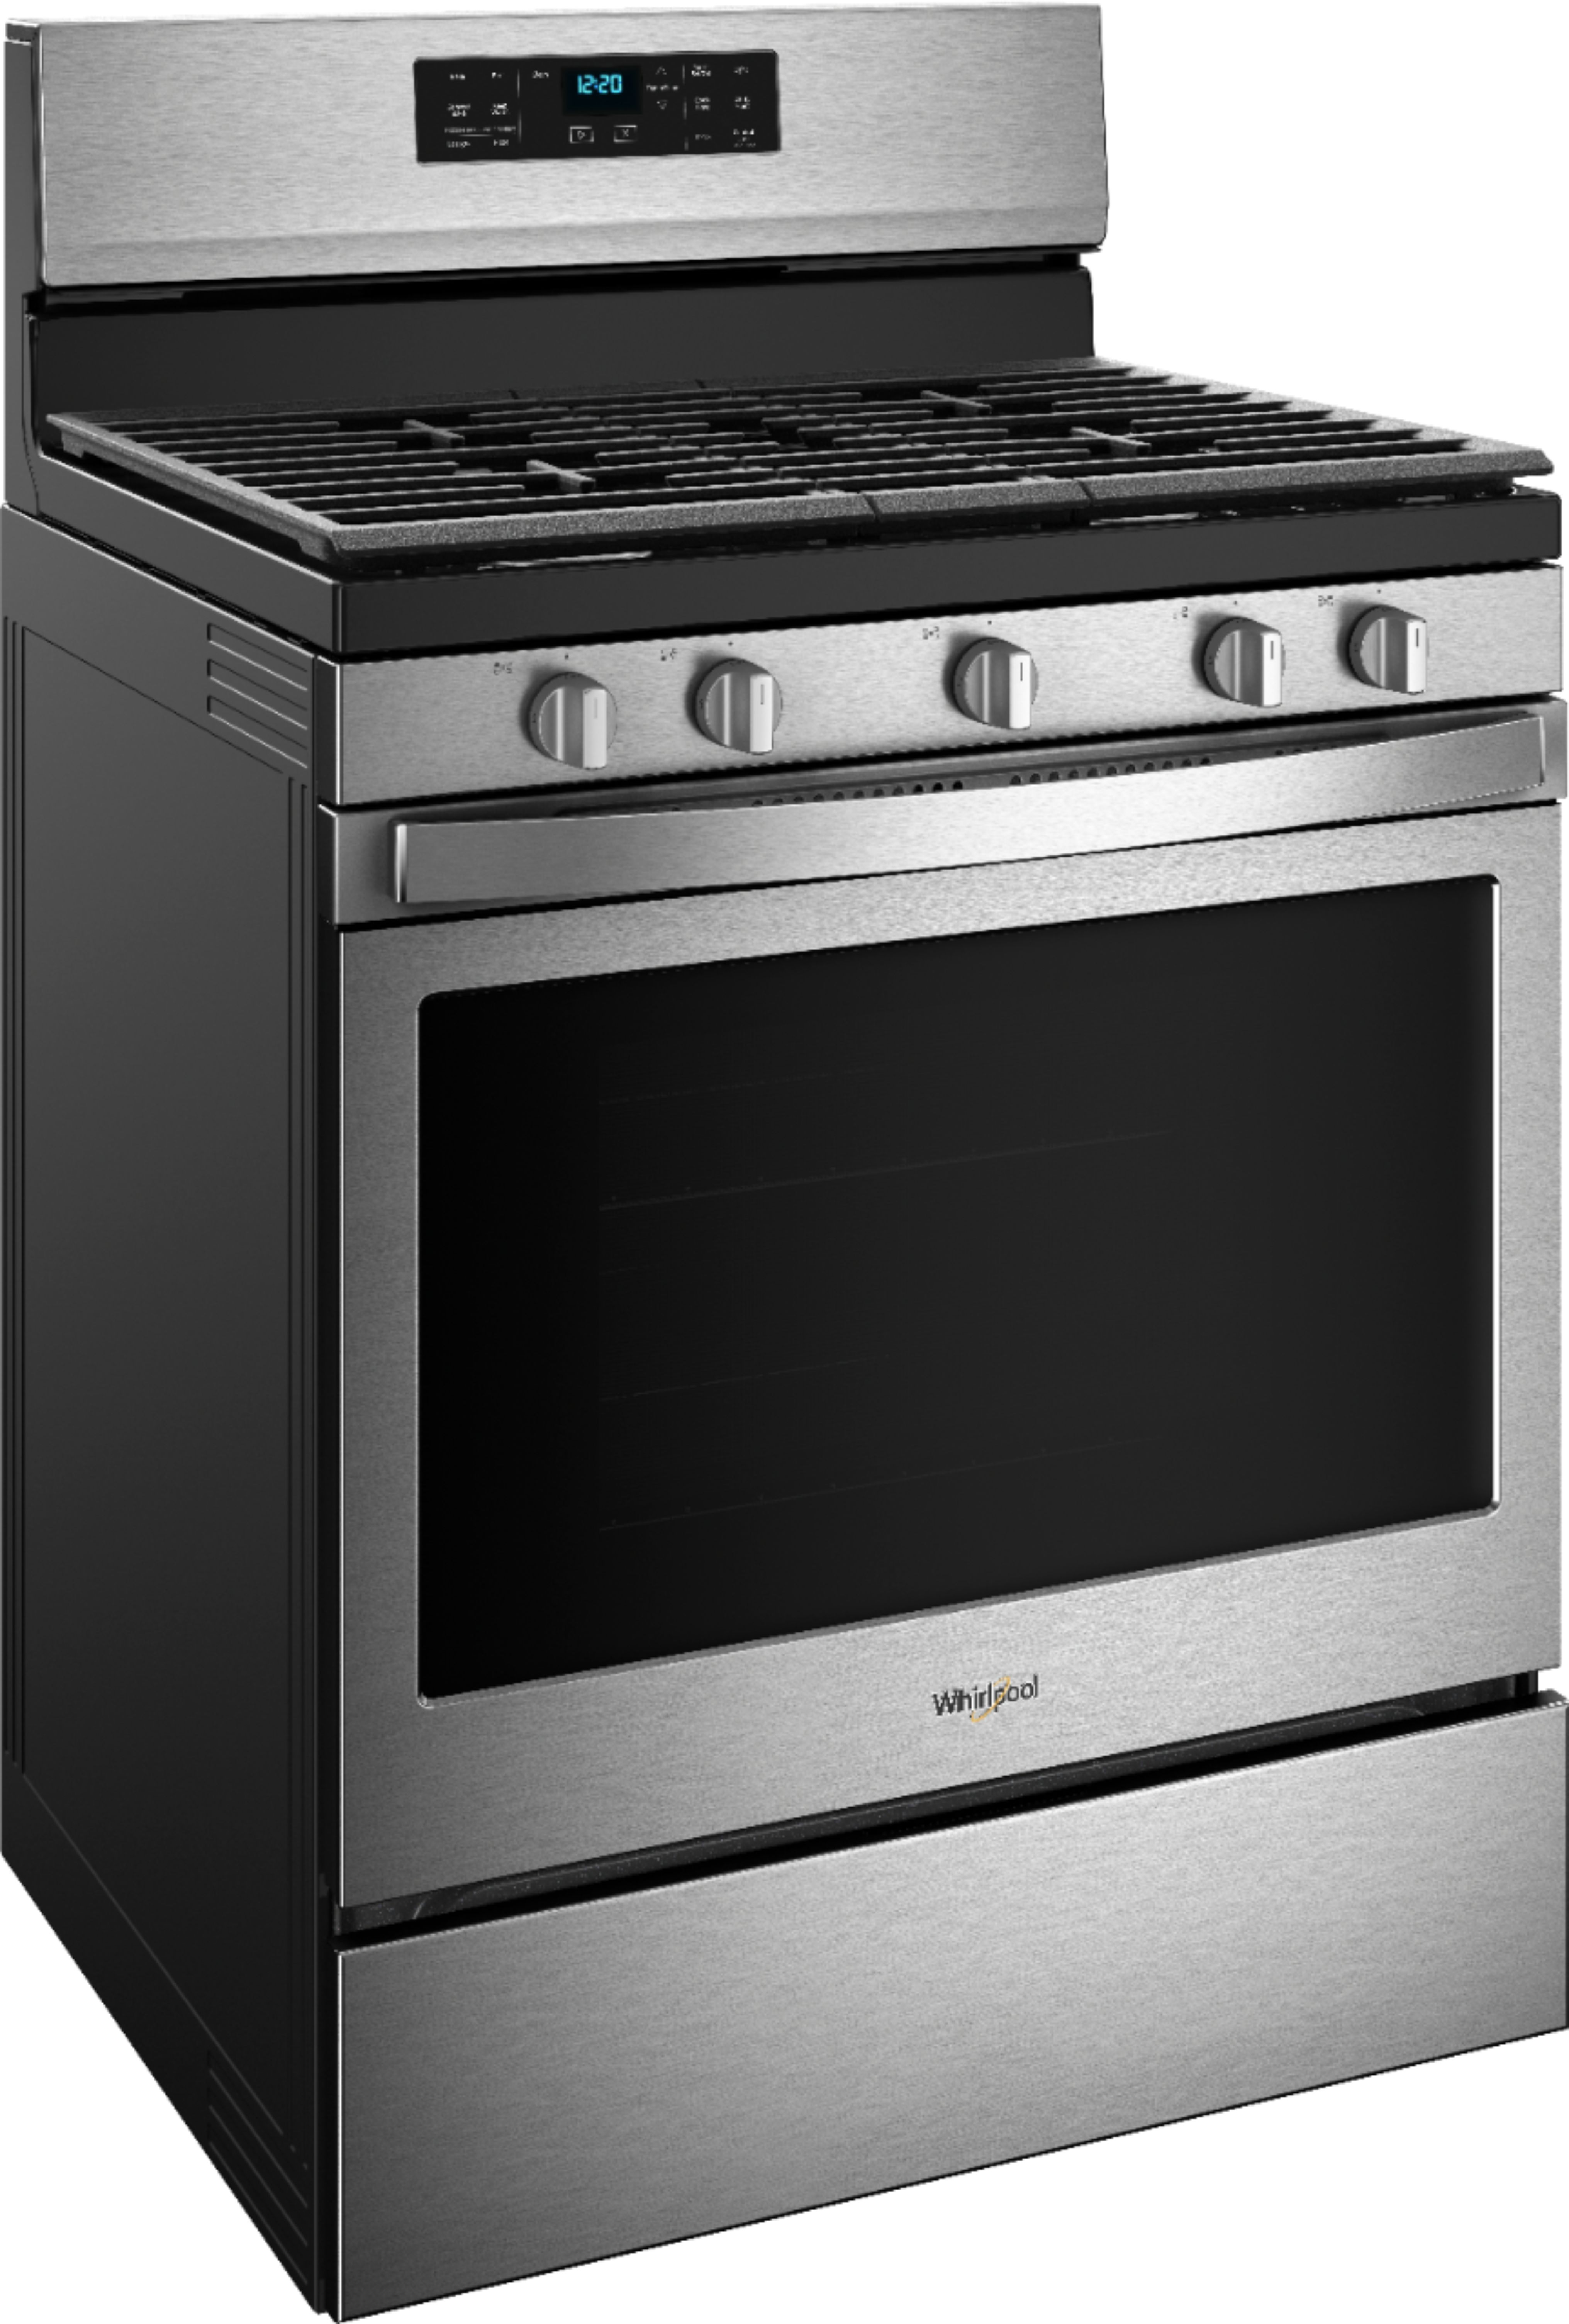 Angle View: KitchenAid - 5.8 Cu. Ft. Self-Cleaning Freestanding Gas True Convection Range with Even-Heat - Stainless steel